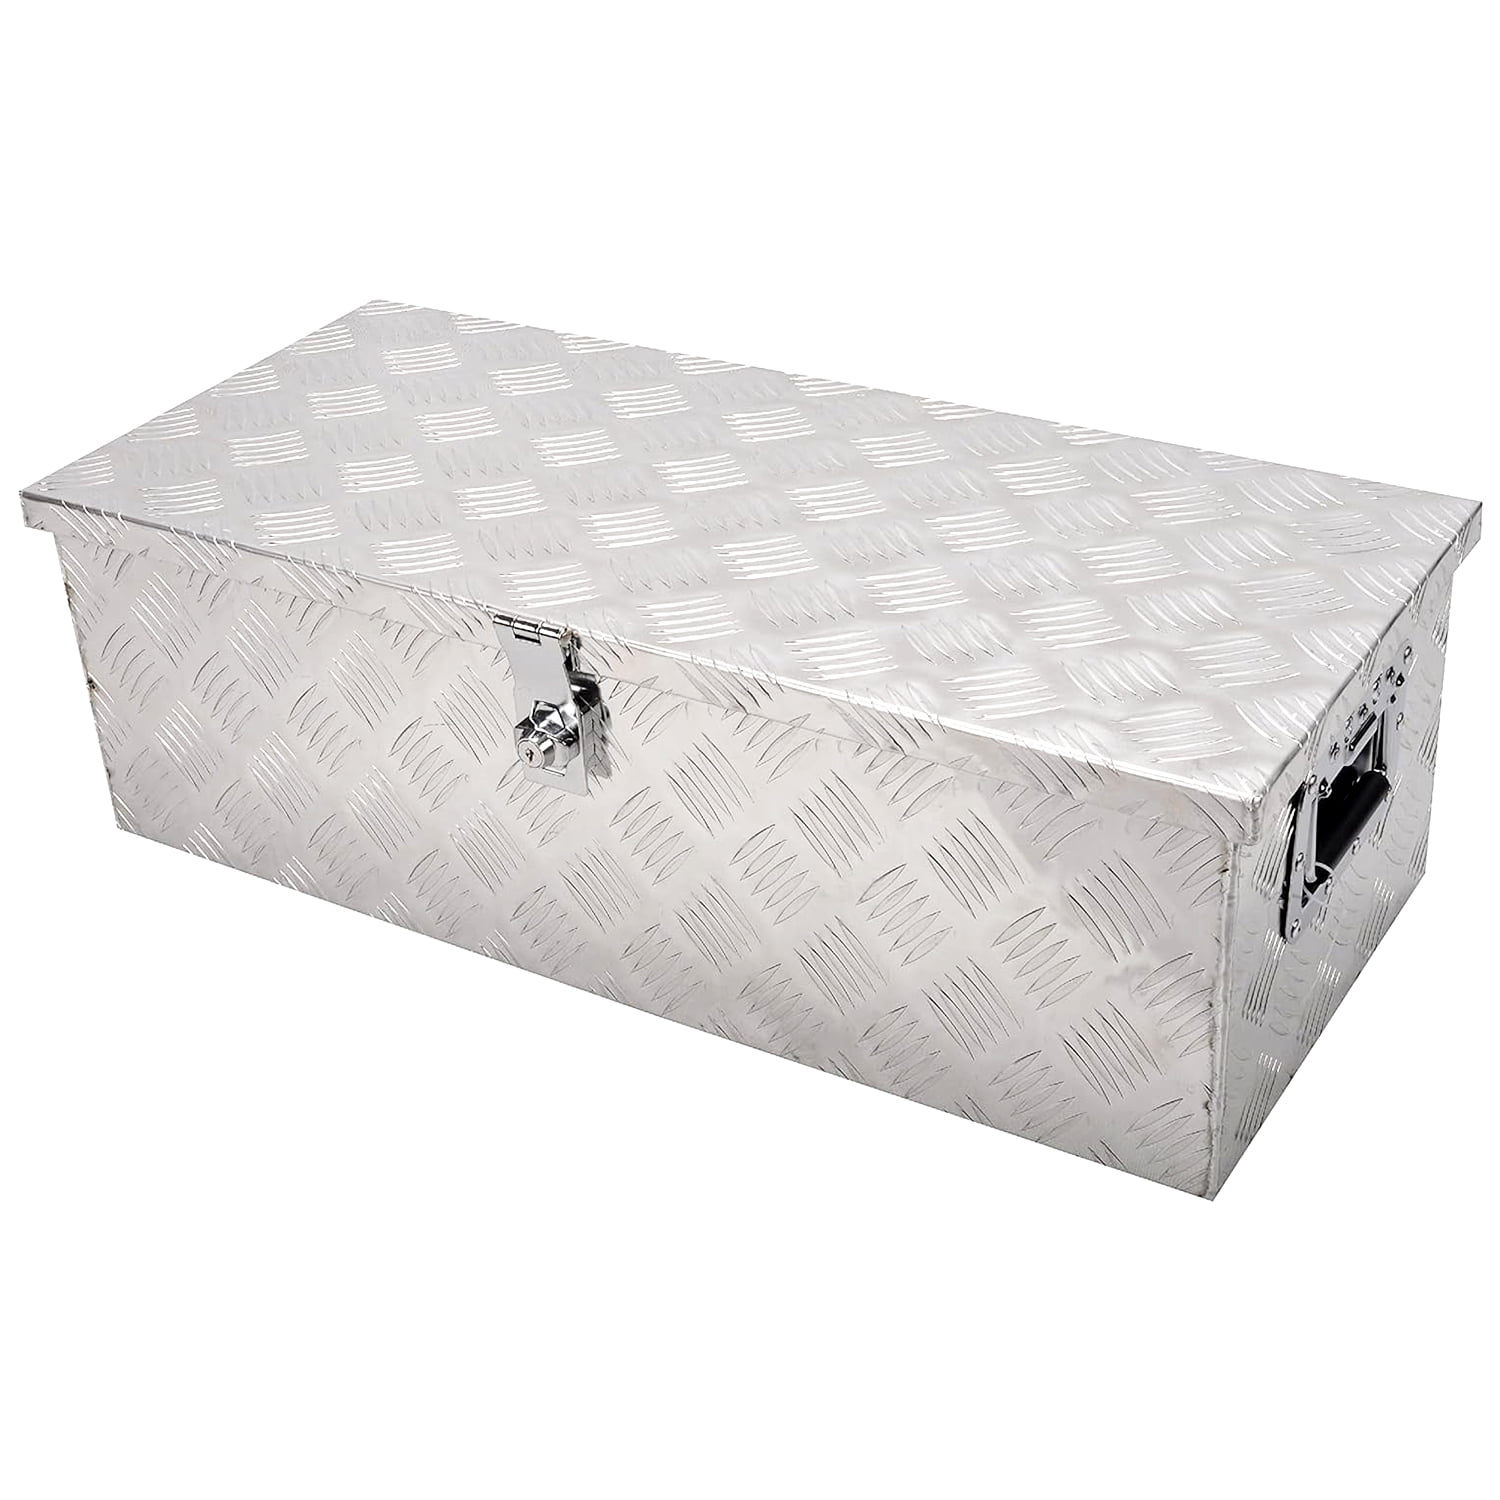 FGJQEFG 30 Inch Aluminum Trailer Tool Box Small Pick Up Truck Bed Storage  Silver 30x13x10 Inch 